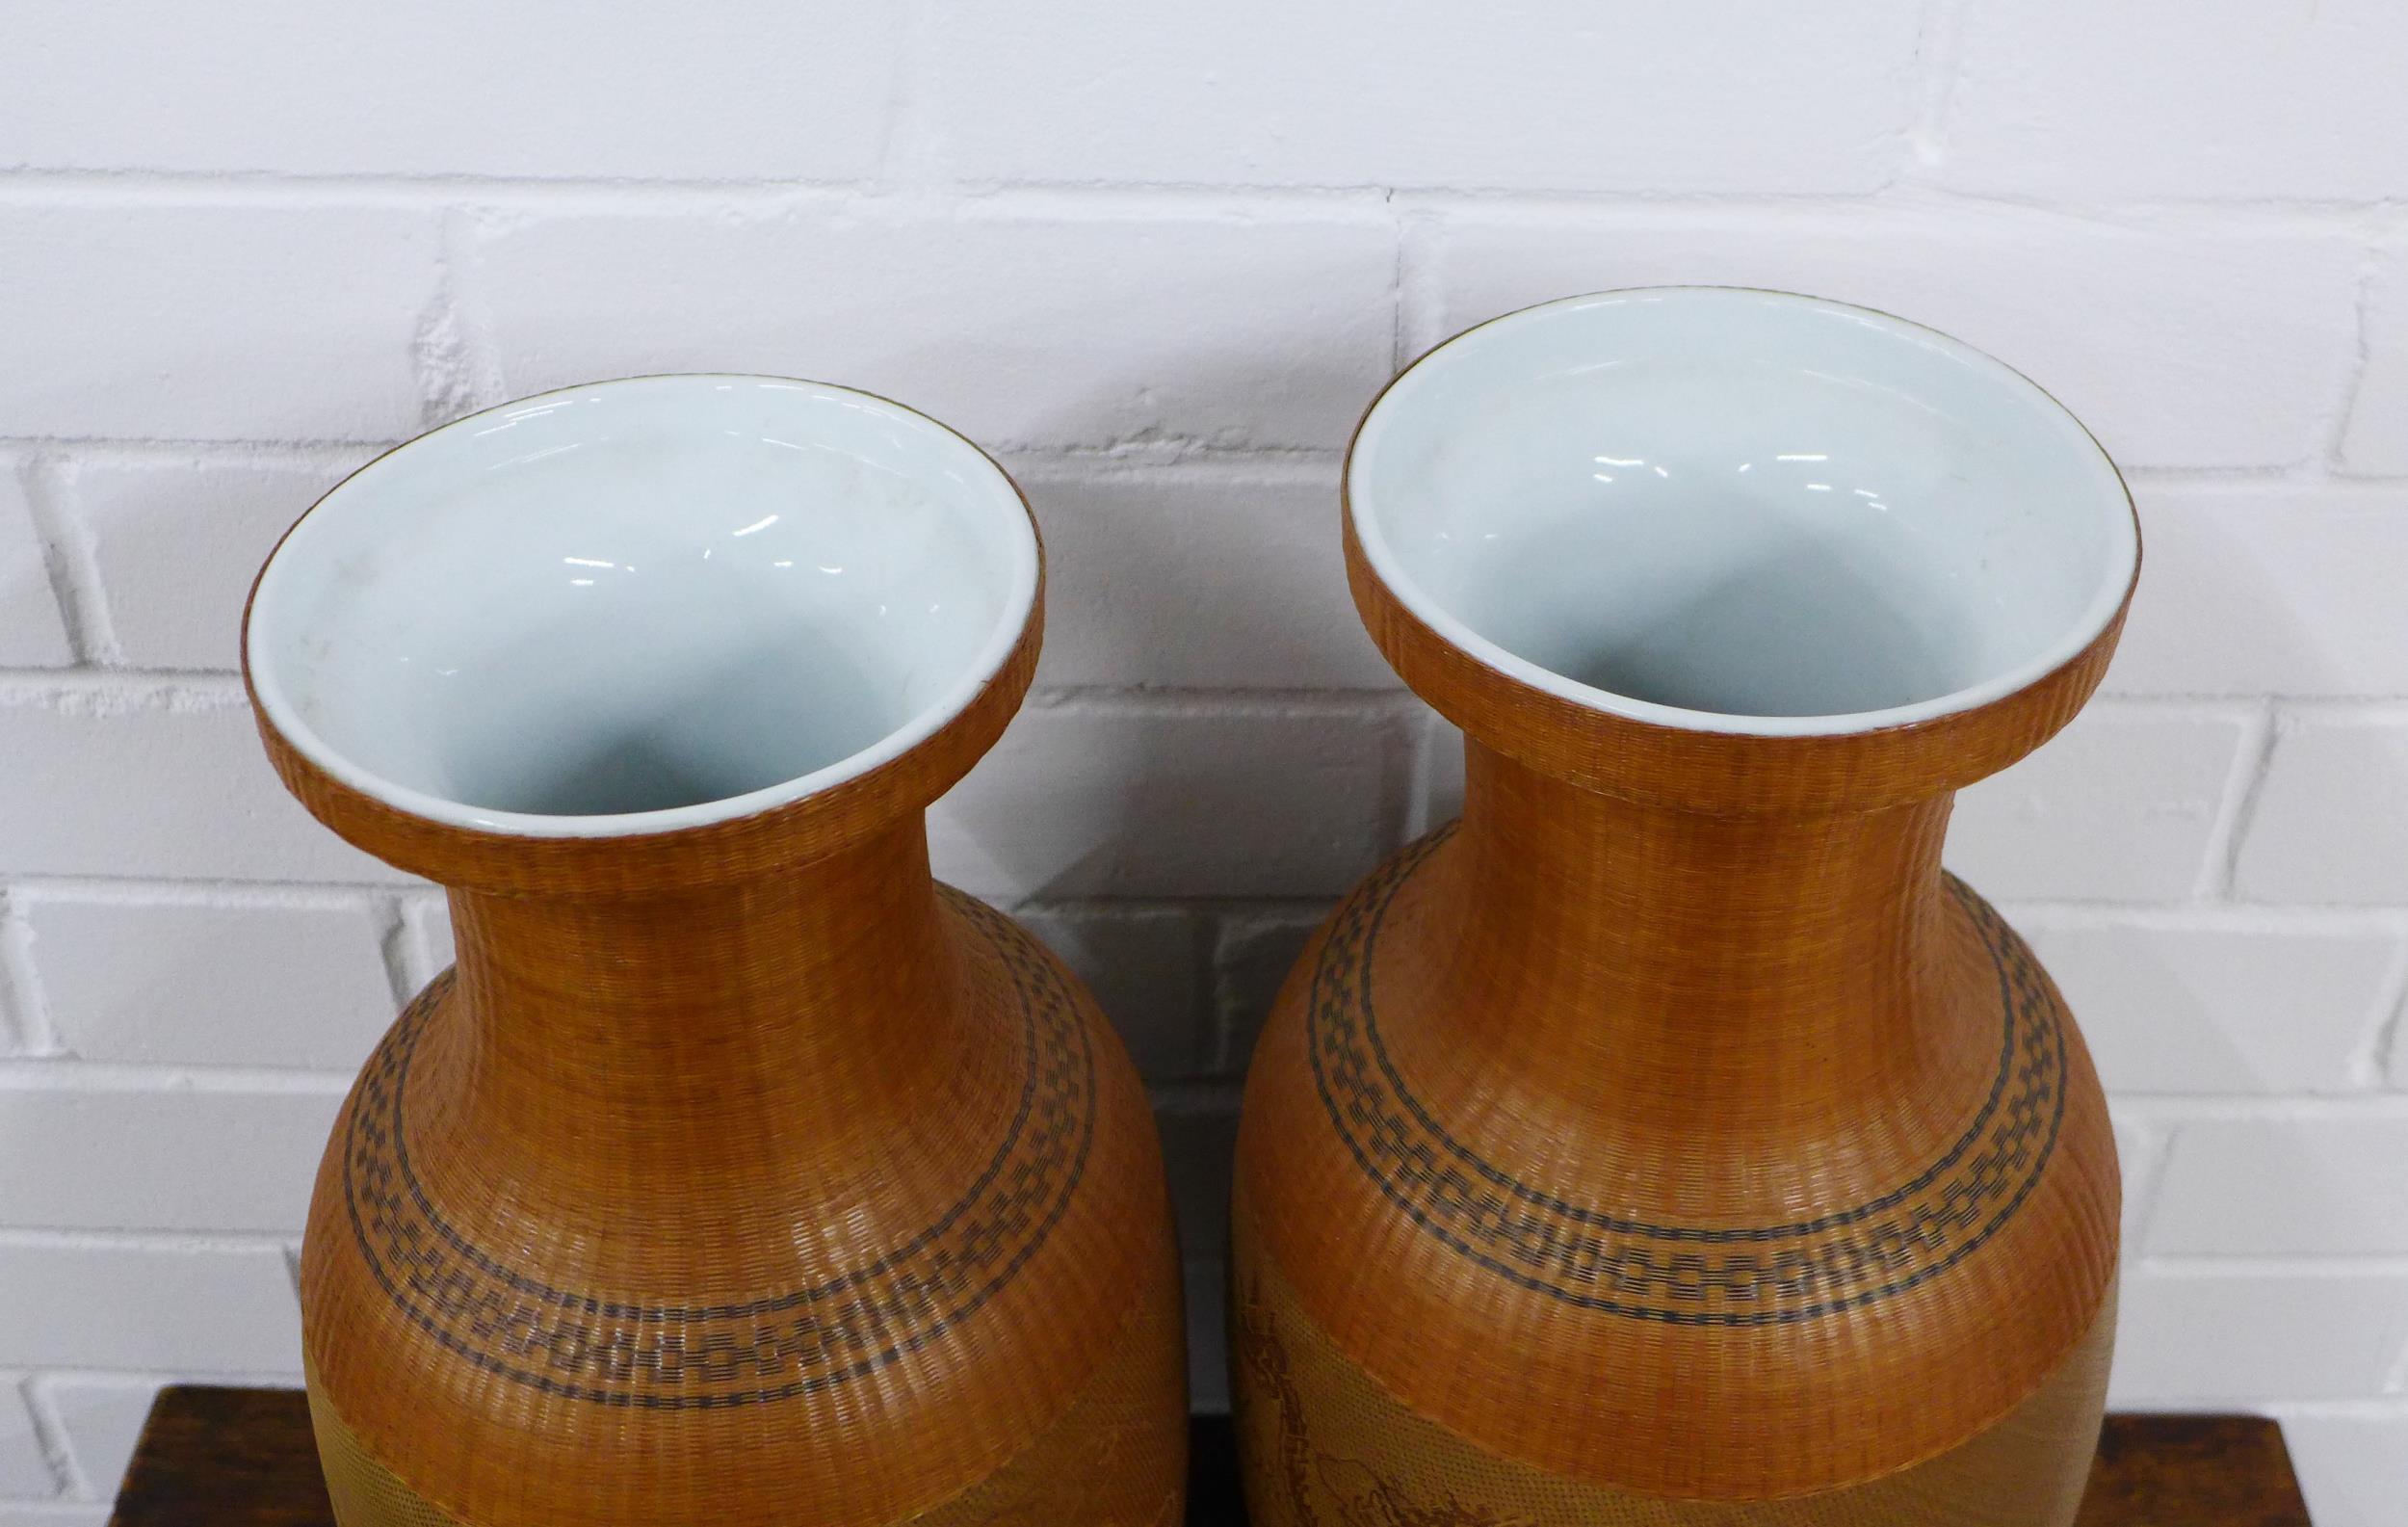 Pair of chinoiserie vases with a woven covering, 46cm (2) - Image 3 of 3